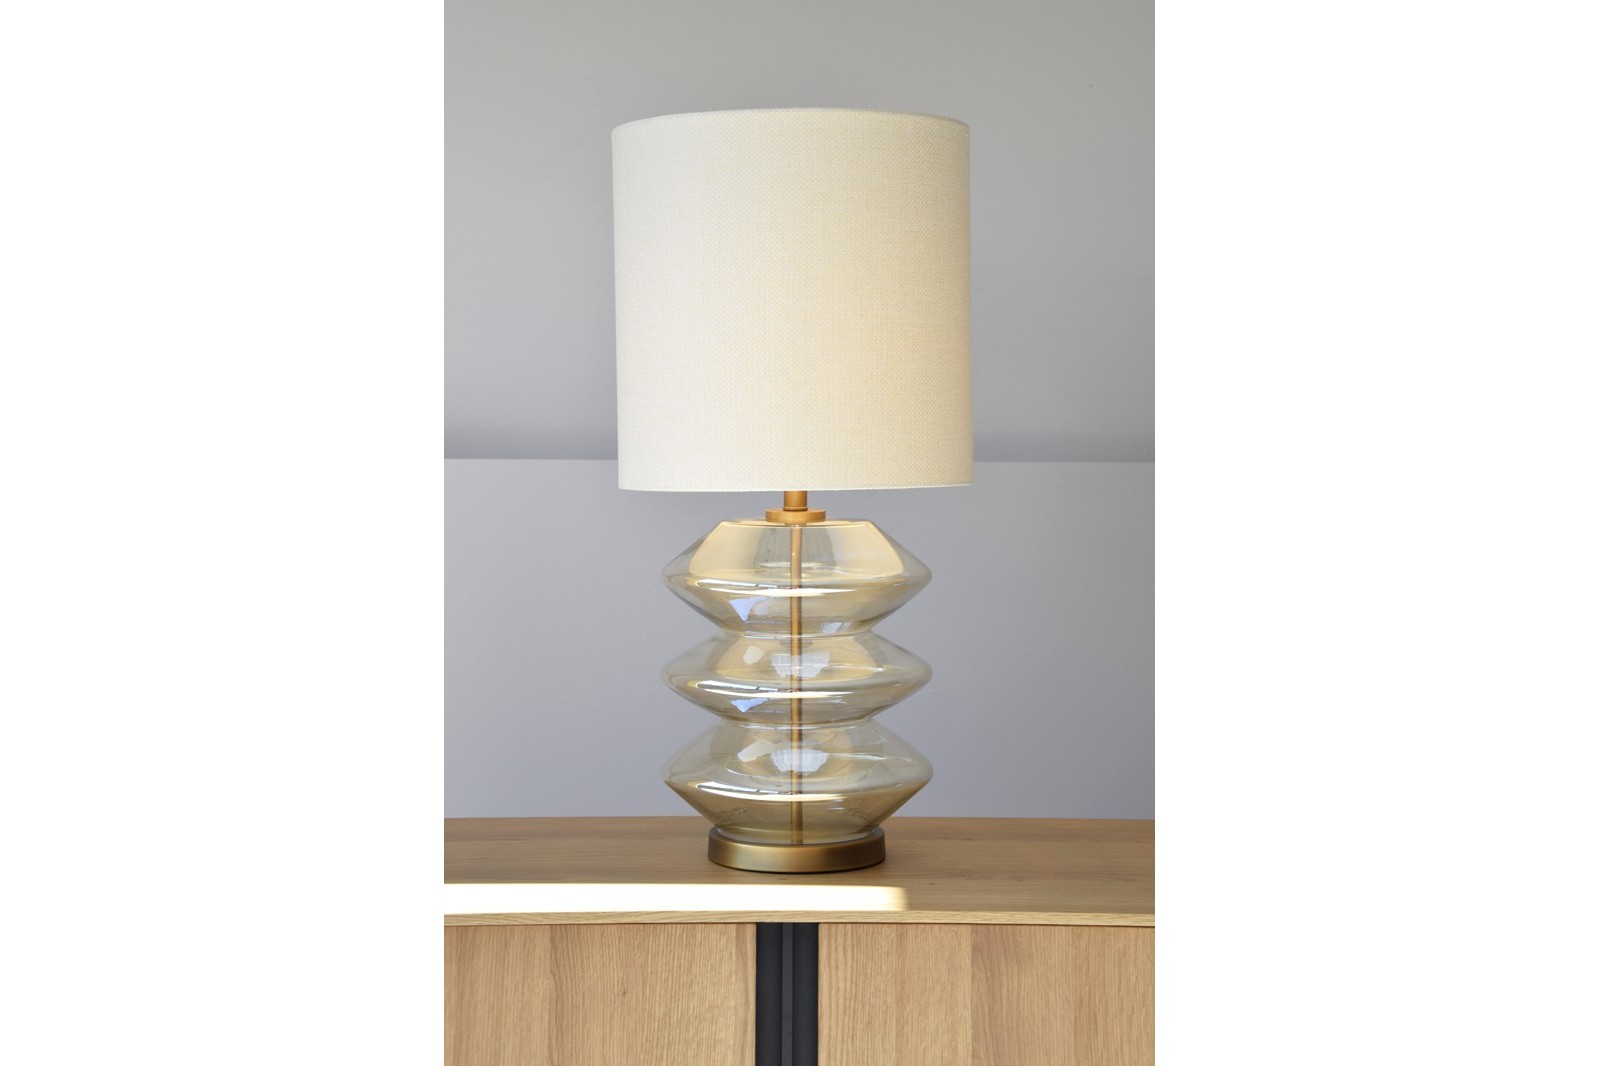 ZIG ZAG TABLE LAMP. AMBER GLASS. WITH SHADE